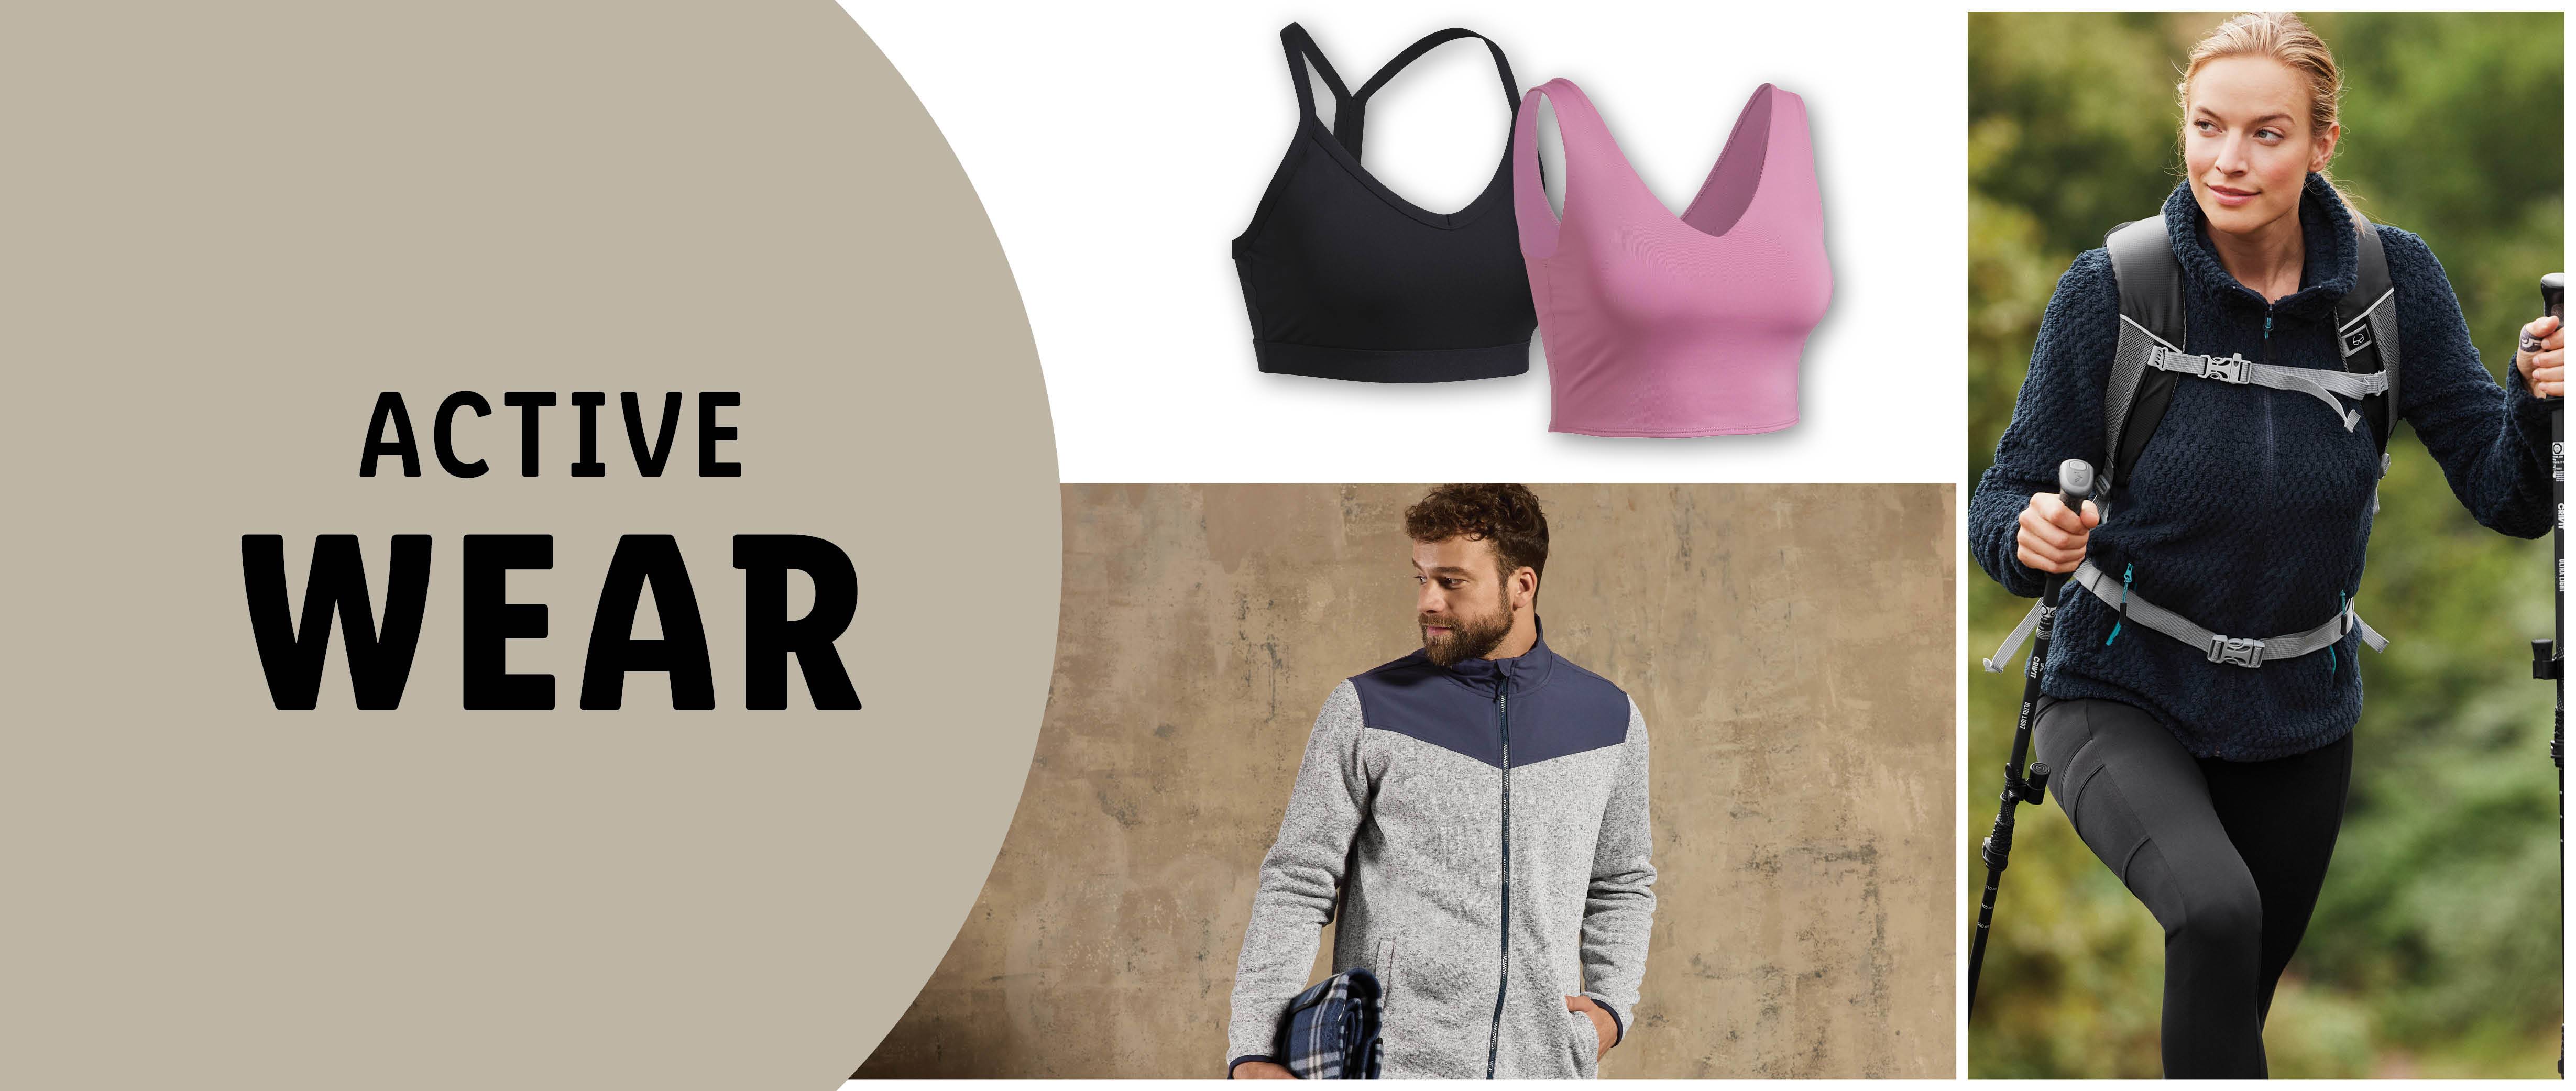 Sportswear and fitness gear in at Lidl – Adventure 52